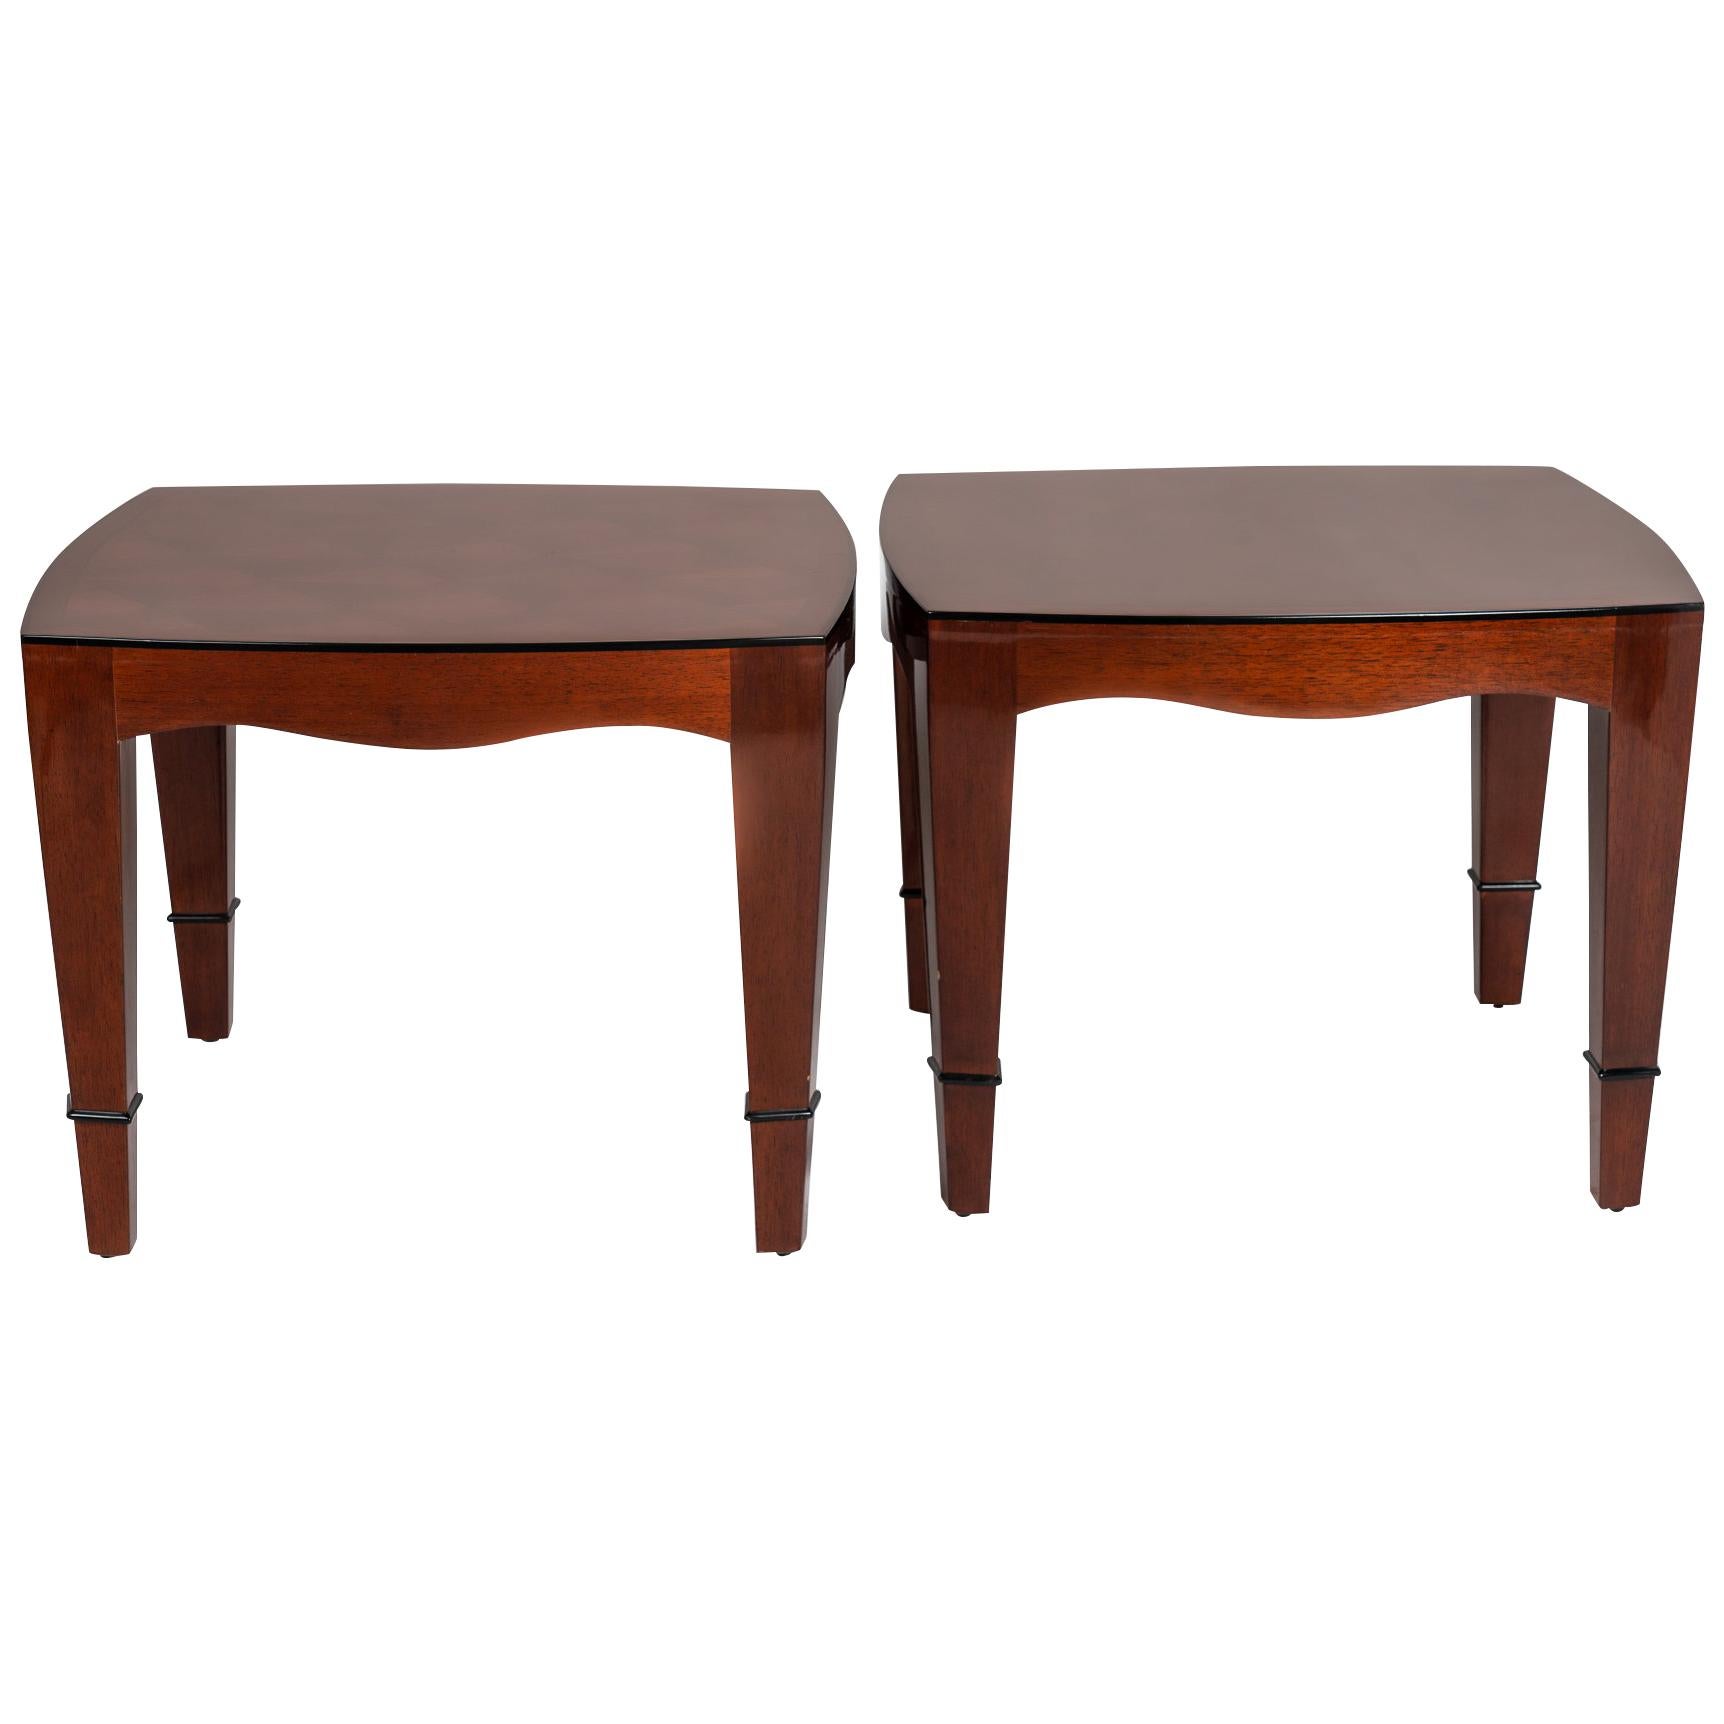 Pair of Mahogany Side Table with Marquetry Work